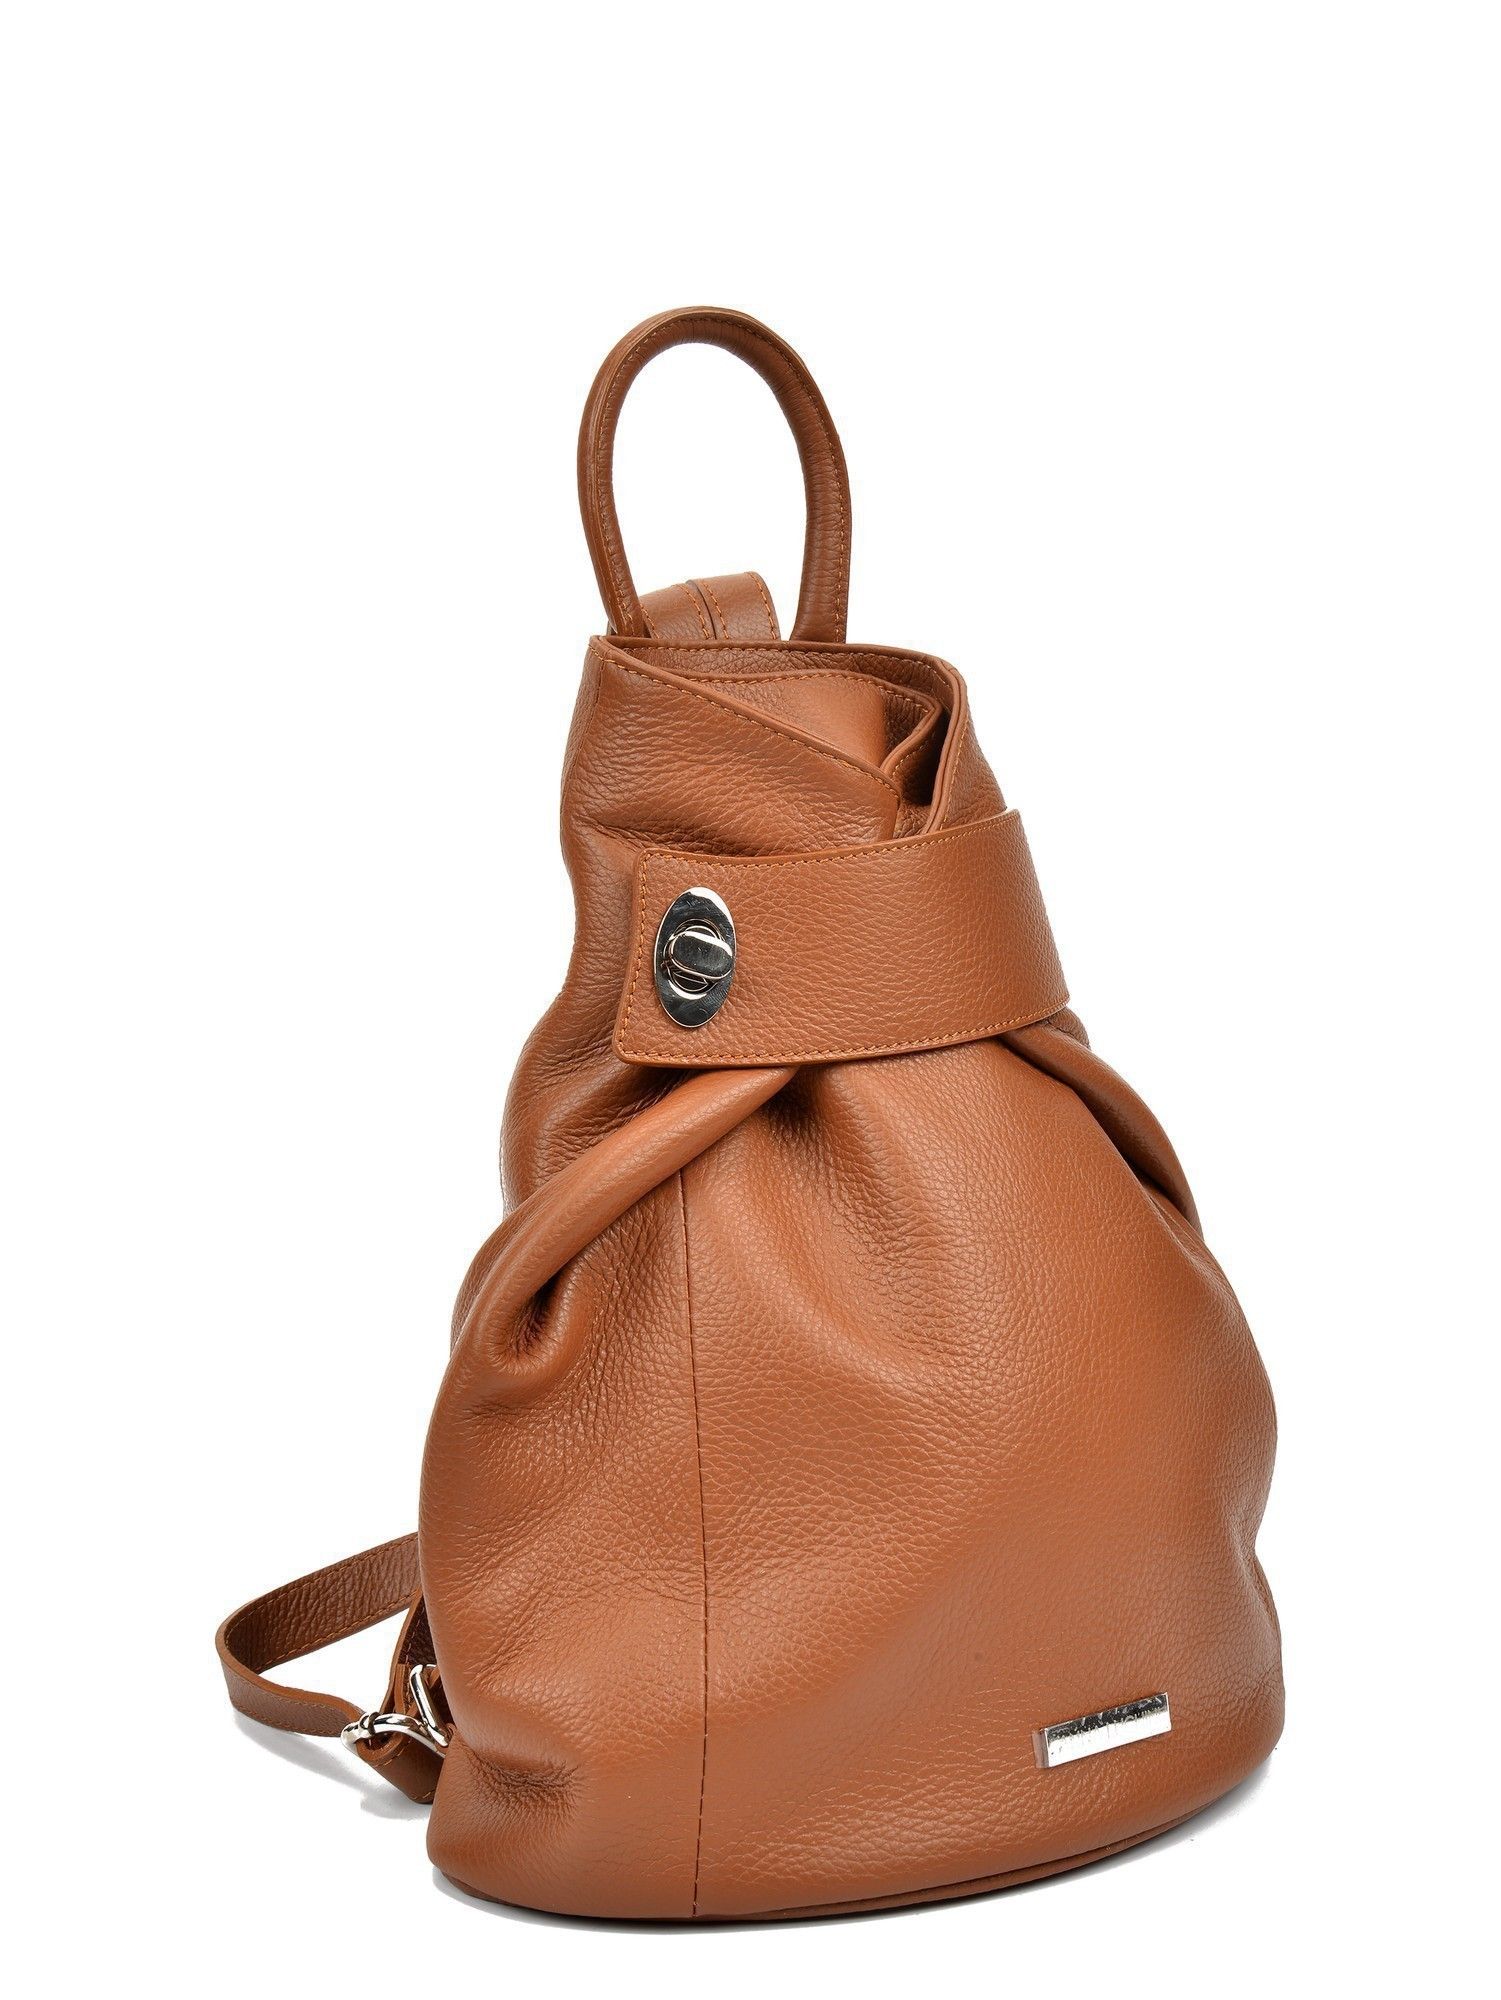 Backpack
100% cow leather
Single top handle
Top zip closure
Side flap closure with turn lock
Interior leather pocket
Back zip pocket
Two adjustable shoulder straps
Dimensions (M): 33.5x34x14 cm